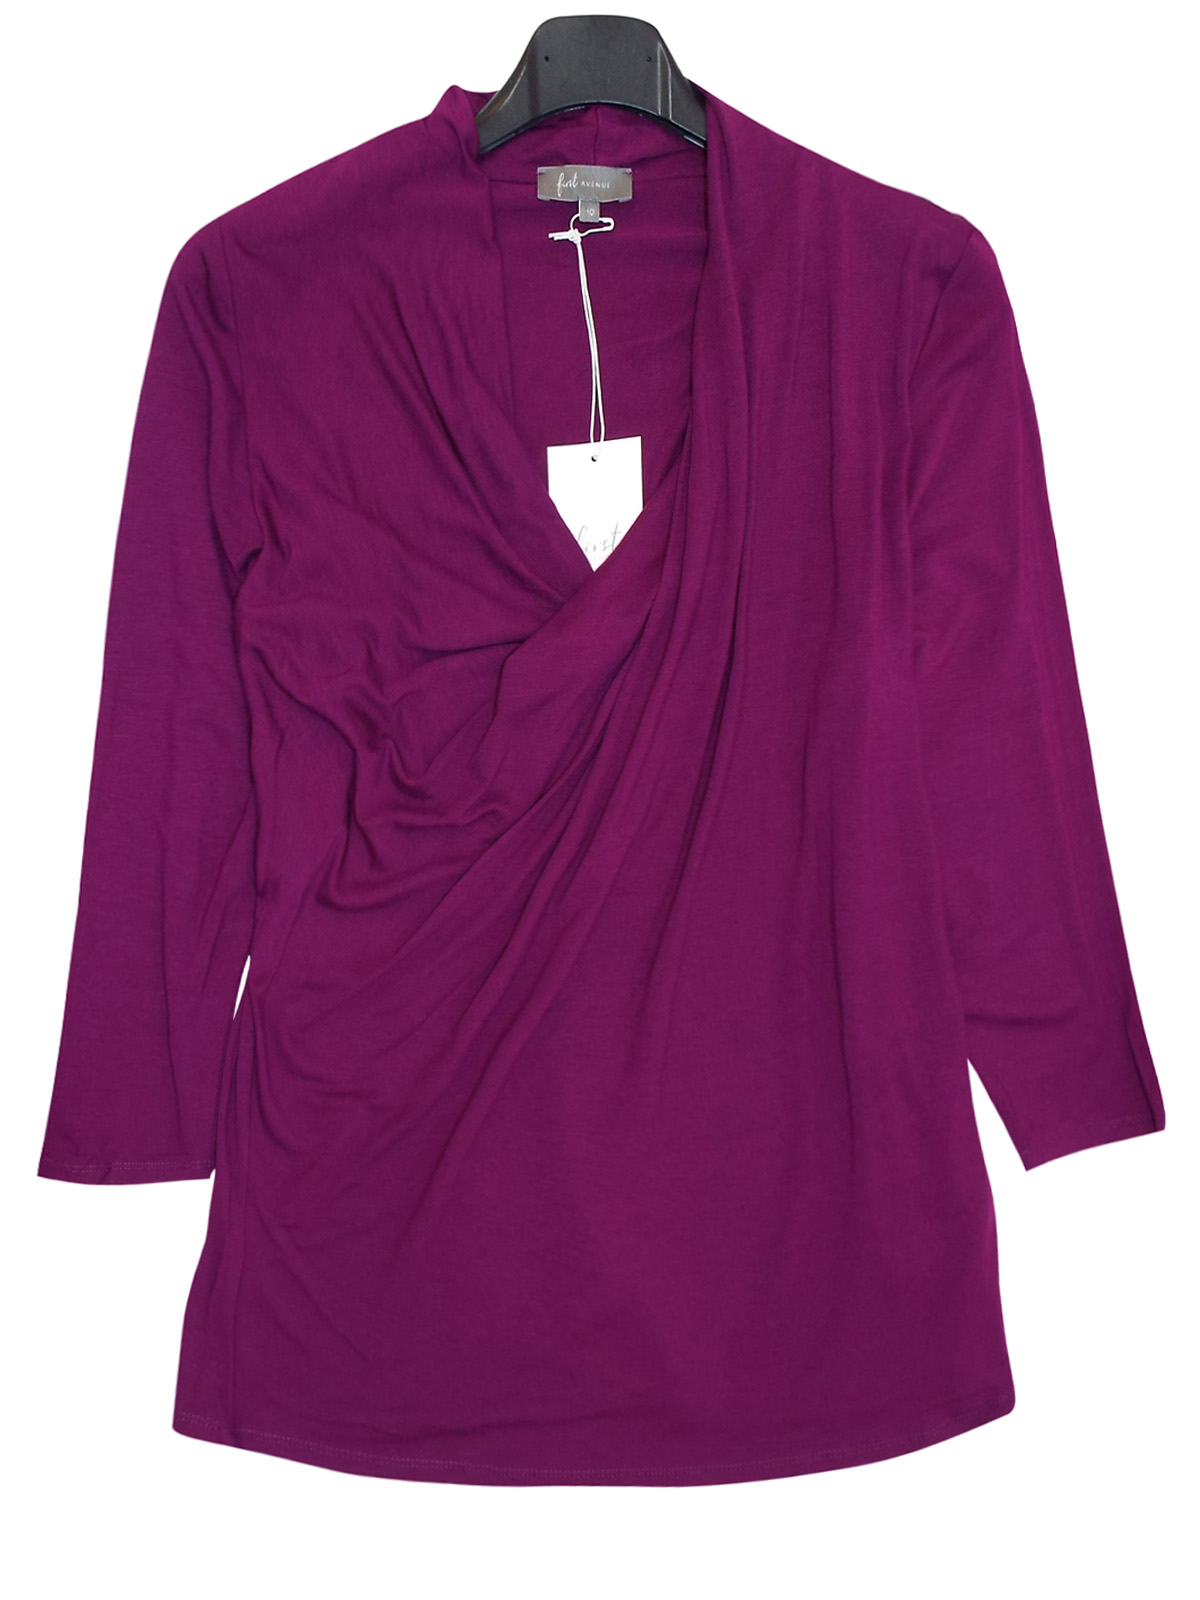 First Avenue MAGENTA Crossover 3/4 Sleeve Jersey Top - Size 10 to 20